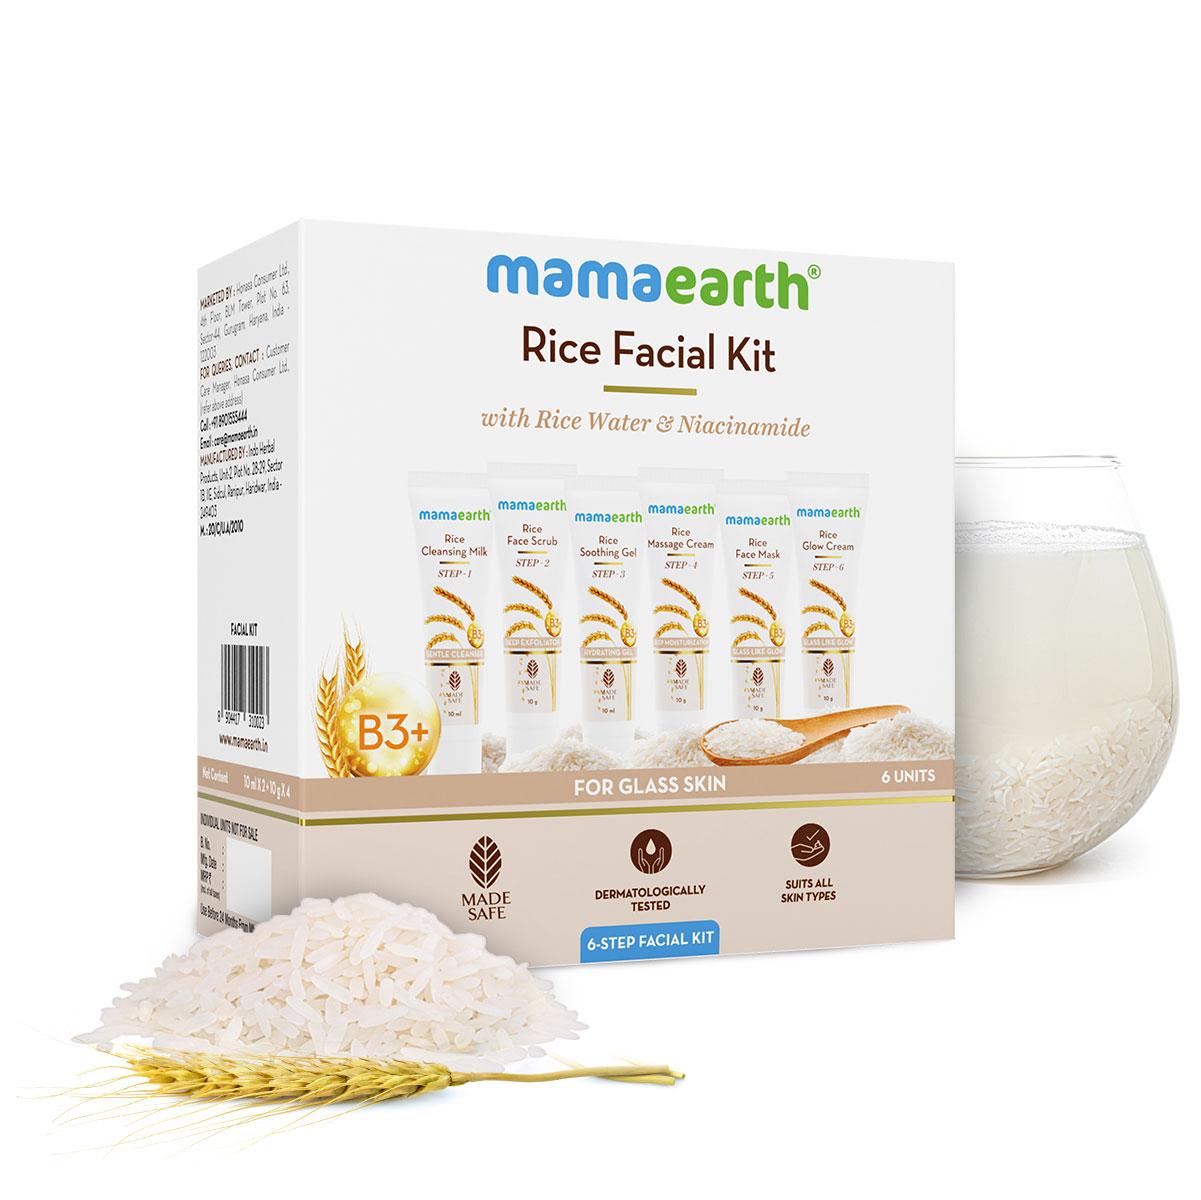 rice facial kit with rice water & niacinamide for glass skin - 60 g